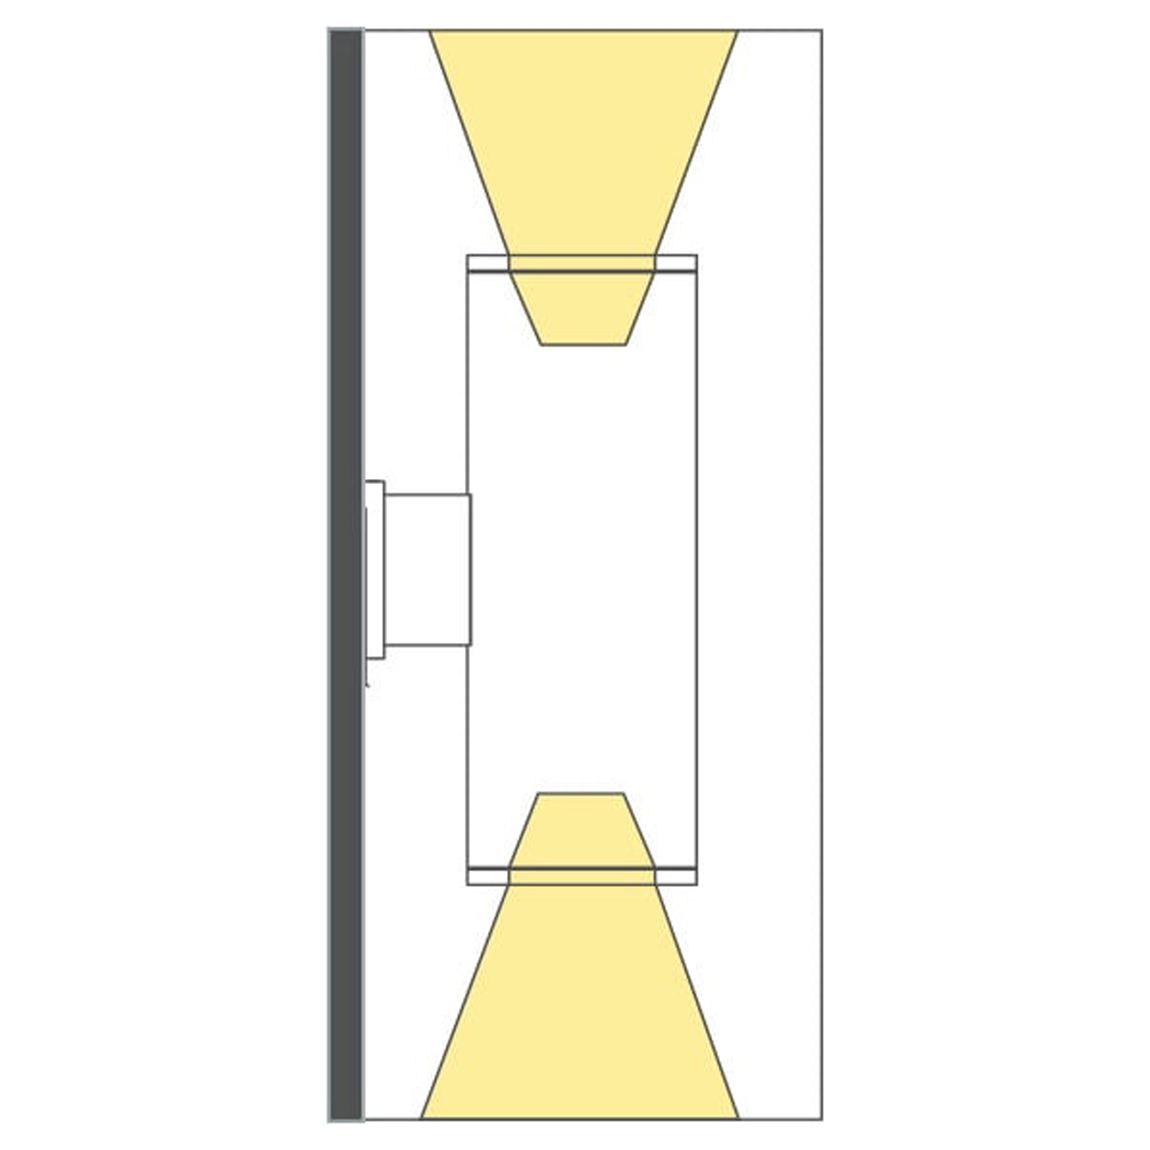 Wac Lighting Ds-Wd06-Ss Tube Architectural 2 Light 18" Tall Led Outdoor Wall Sconce - - image 2 of 4